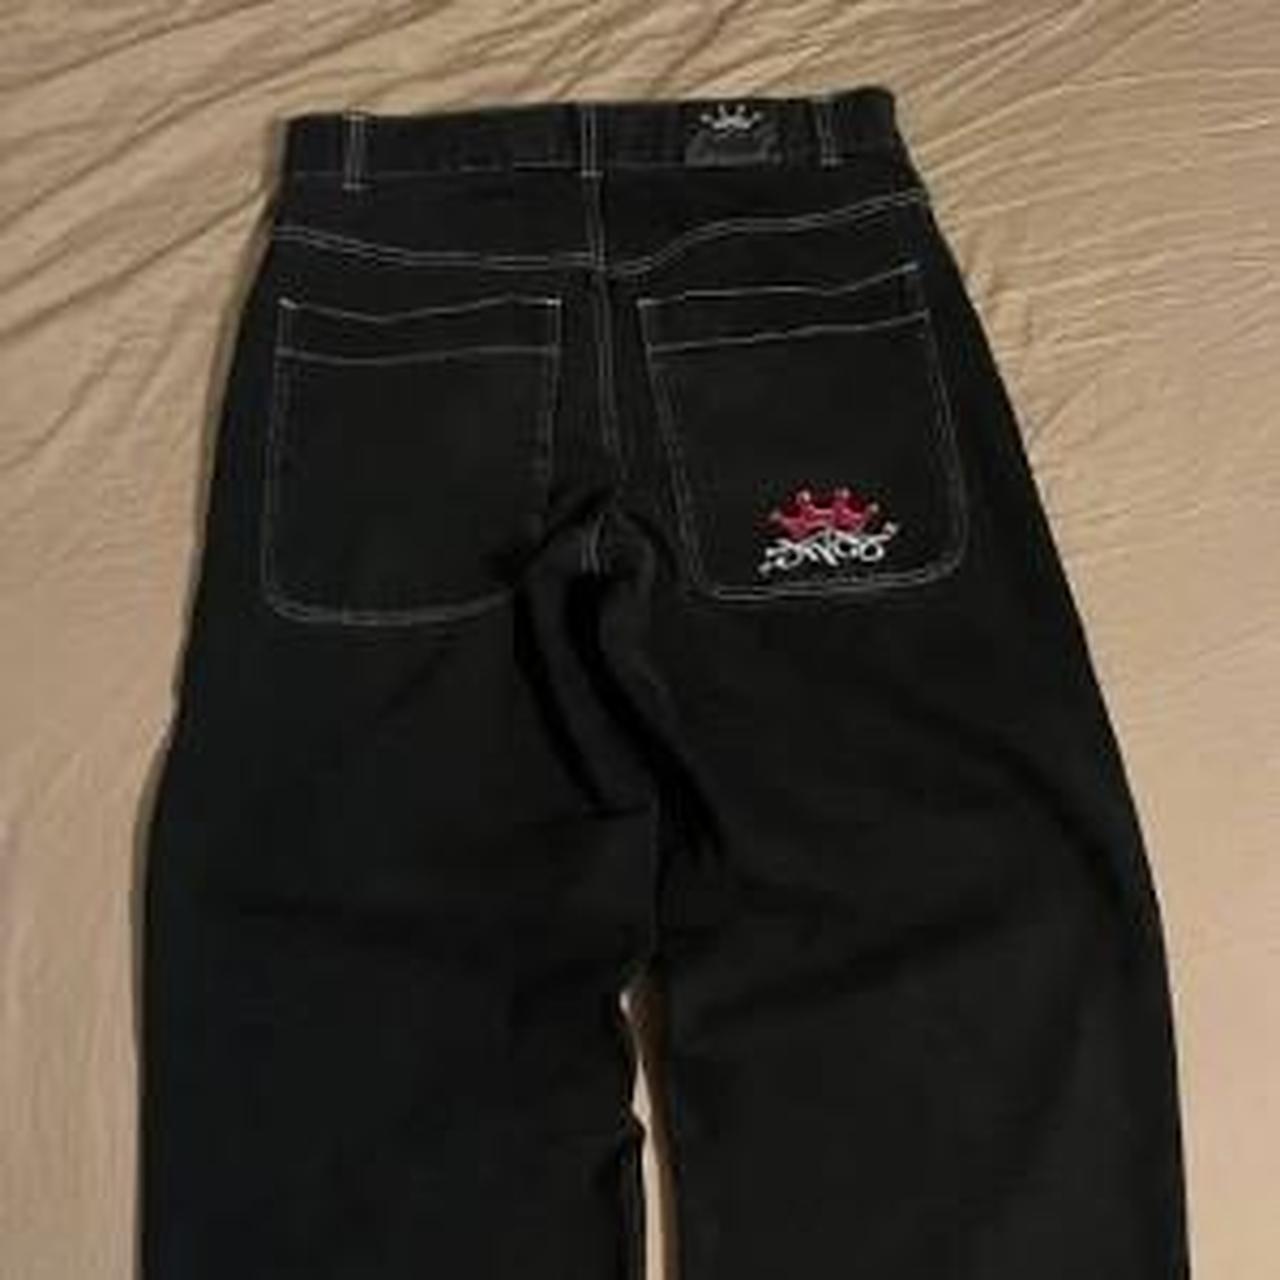 Jnco Jeans With Contrast White Stitching 38 l Jnco... - Depop